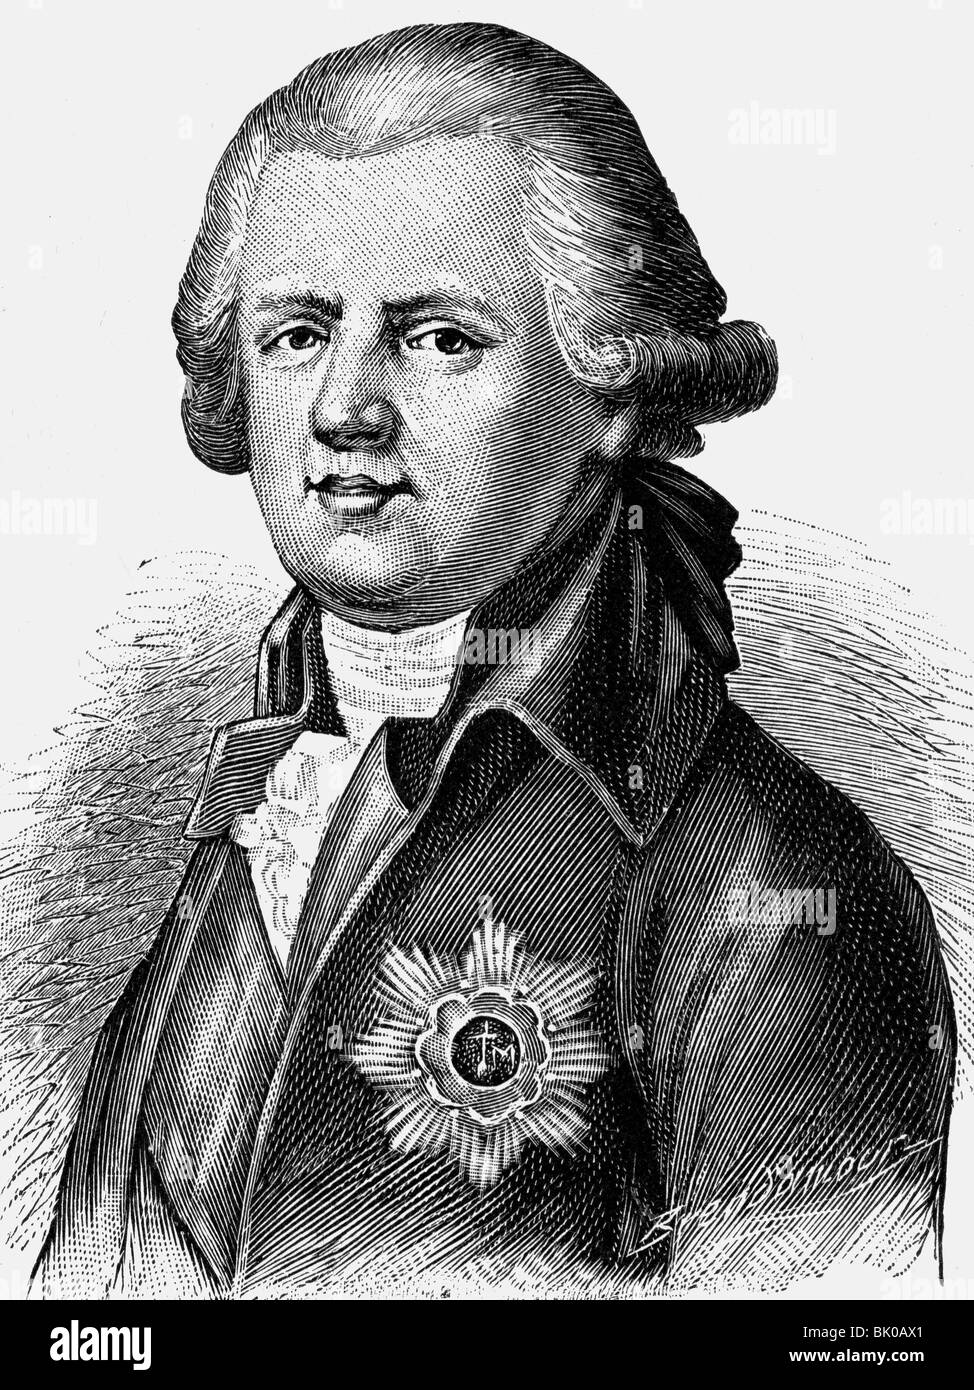 Cobenzl, Johann Ludwig count of, 21.11.1753 - 22.2.1809, Austrian politician, Minister for Foreign Affairs 1800 - 1805,  portrait, wood engraving, 19th century, , Stock Photo